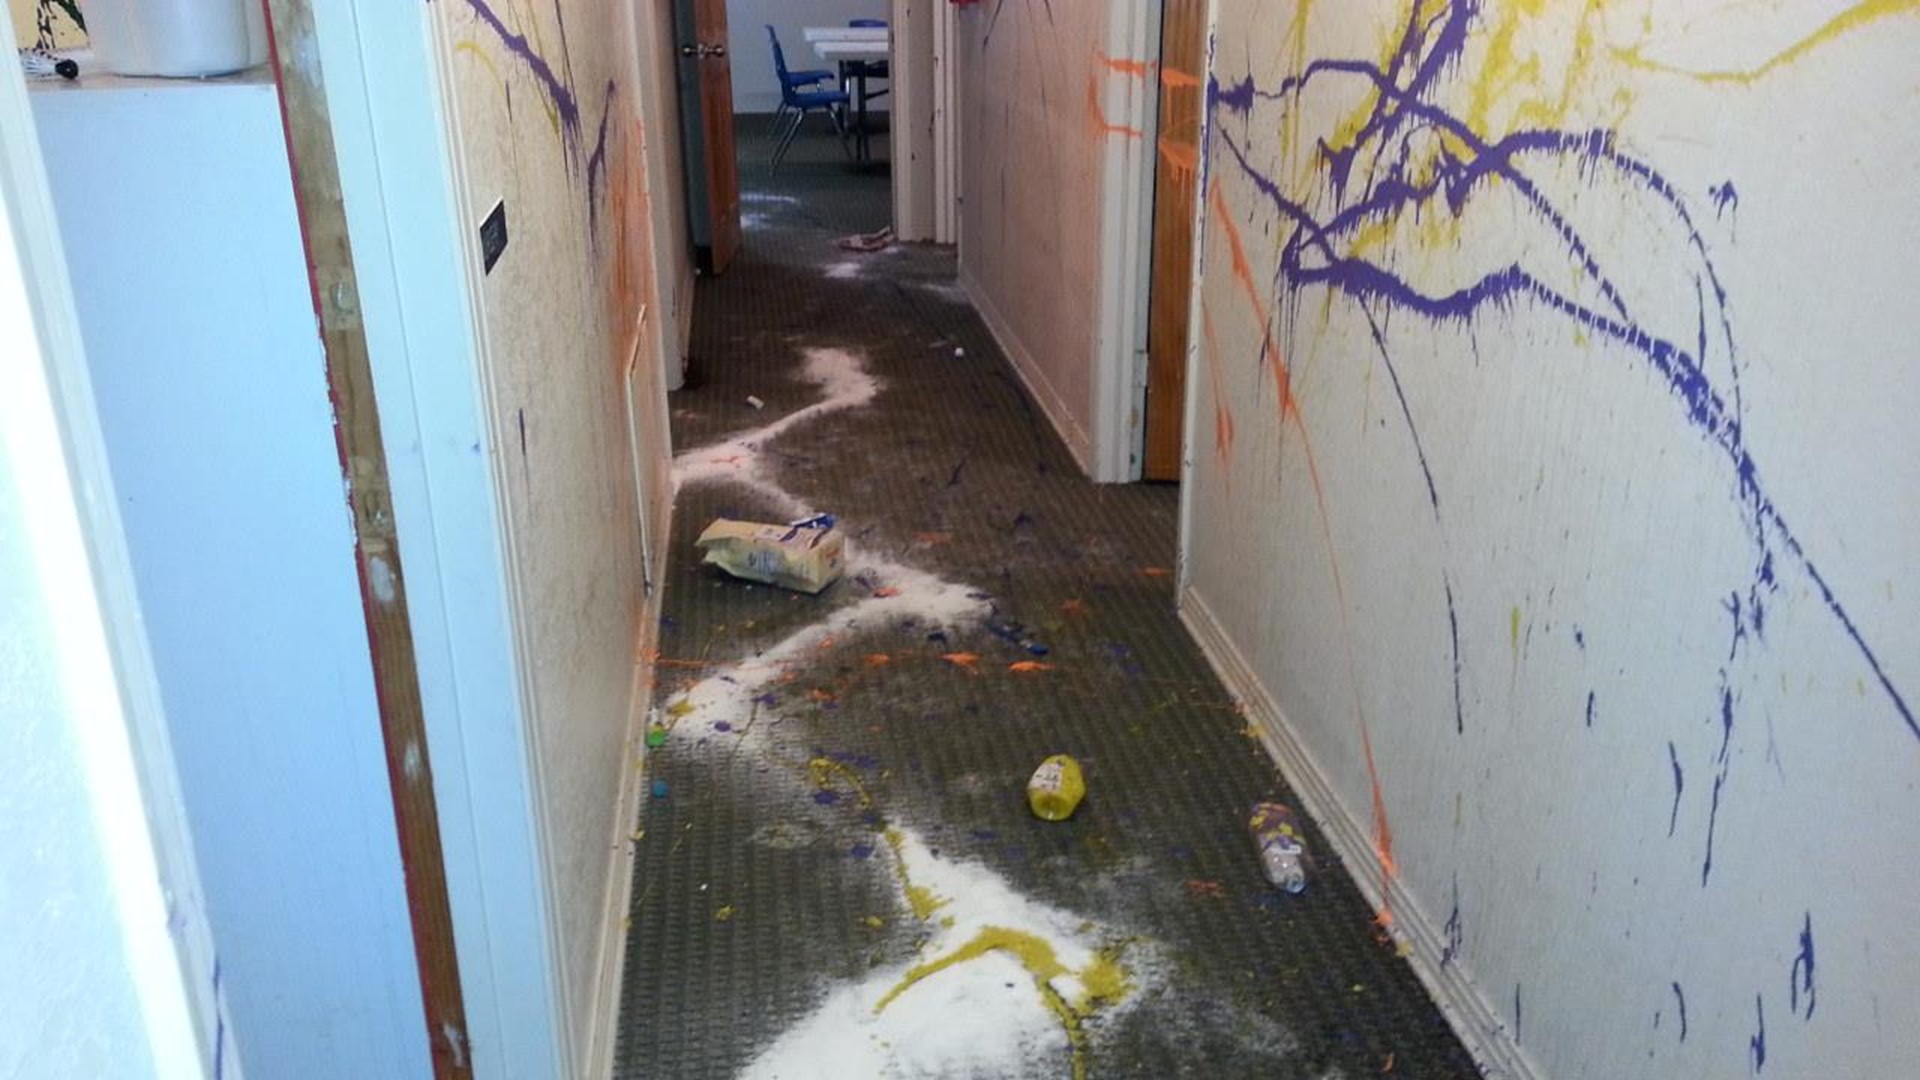 Pictures of the damage in the church showed paint thrown throughout the building, bibles torn up and destroyed, and the nursery ransacked and toys left broken.